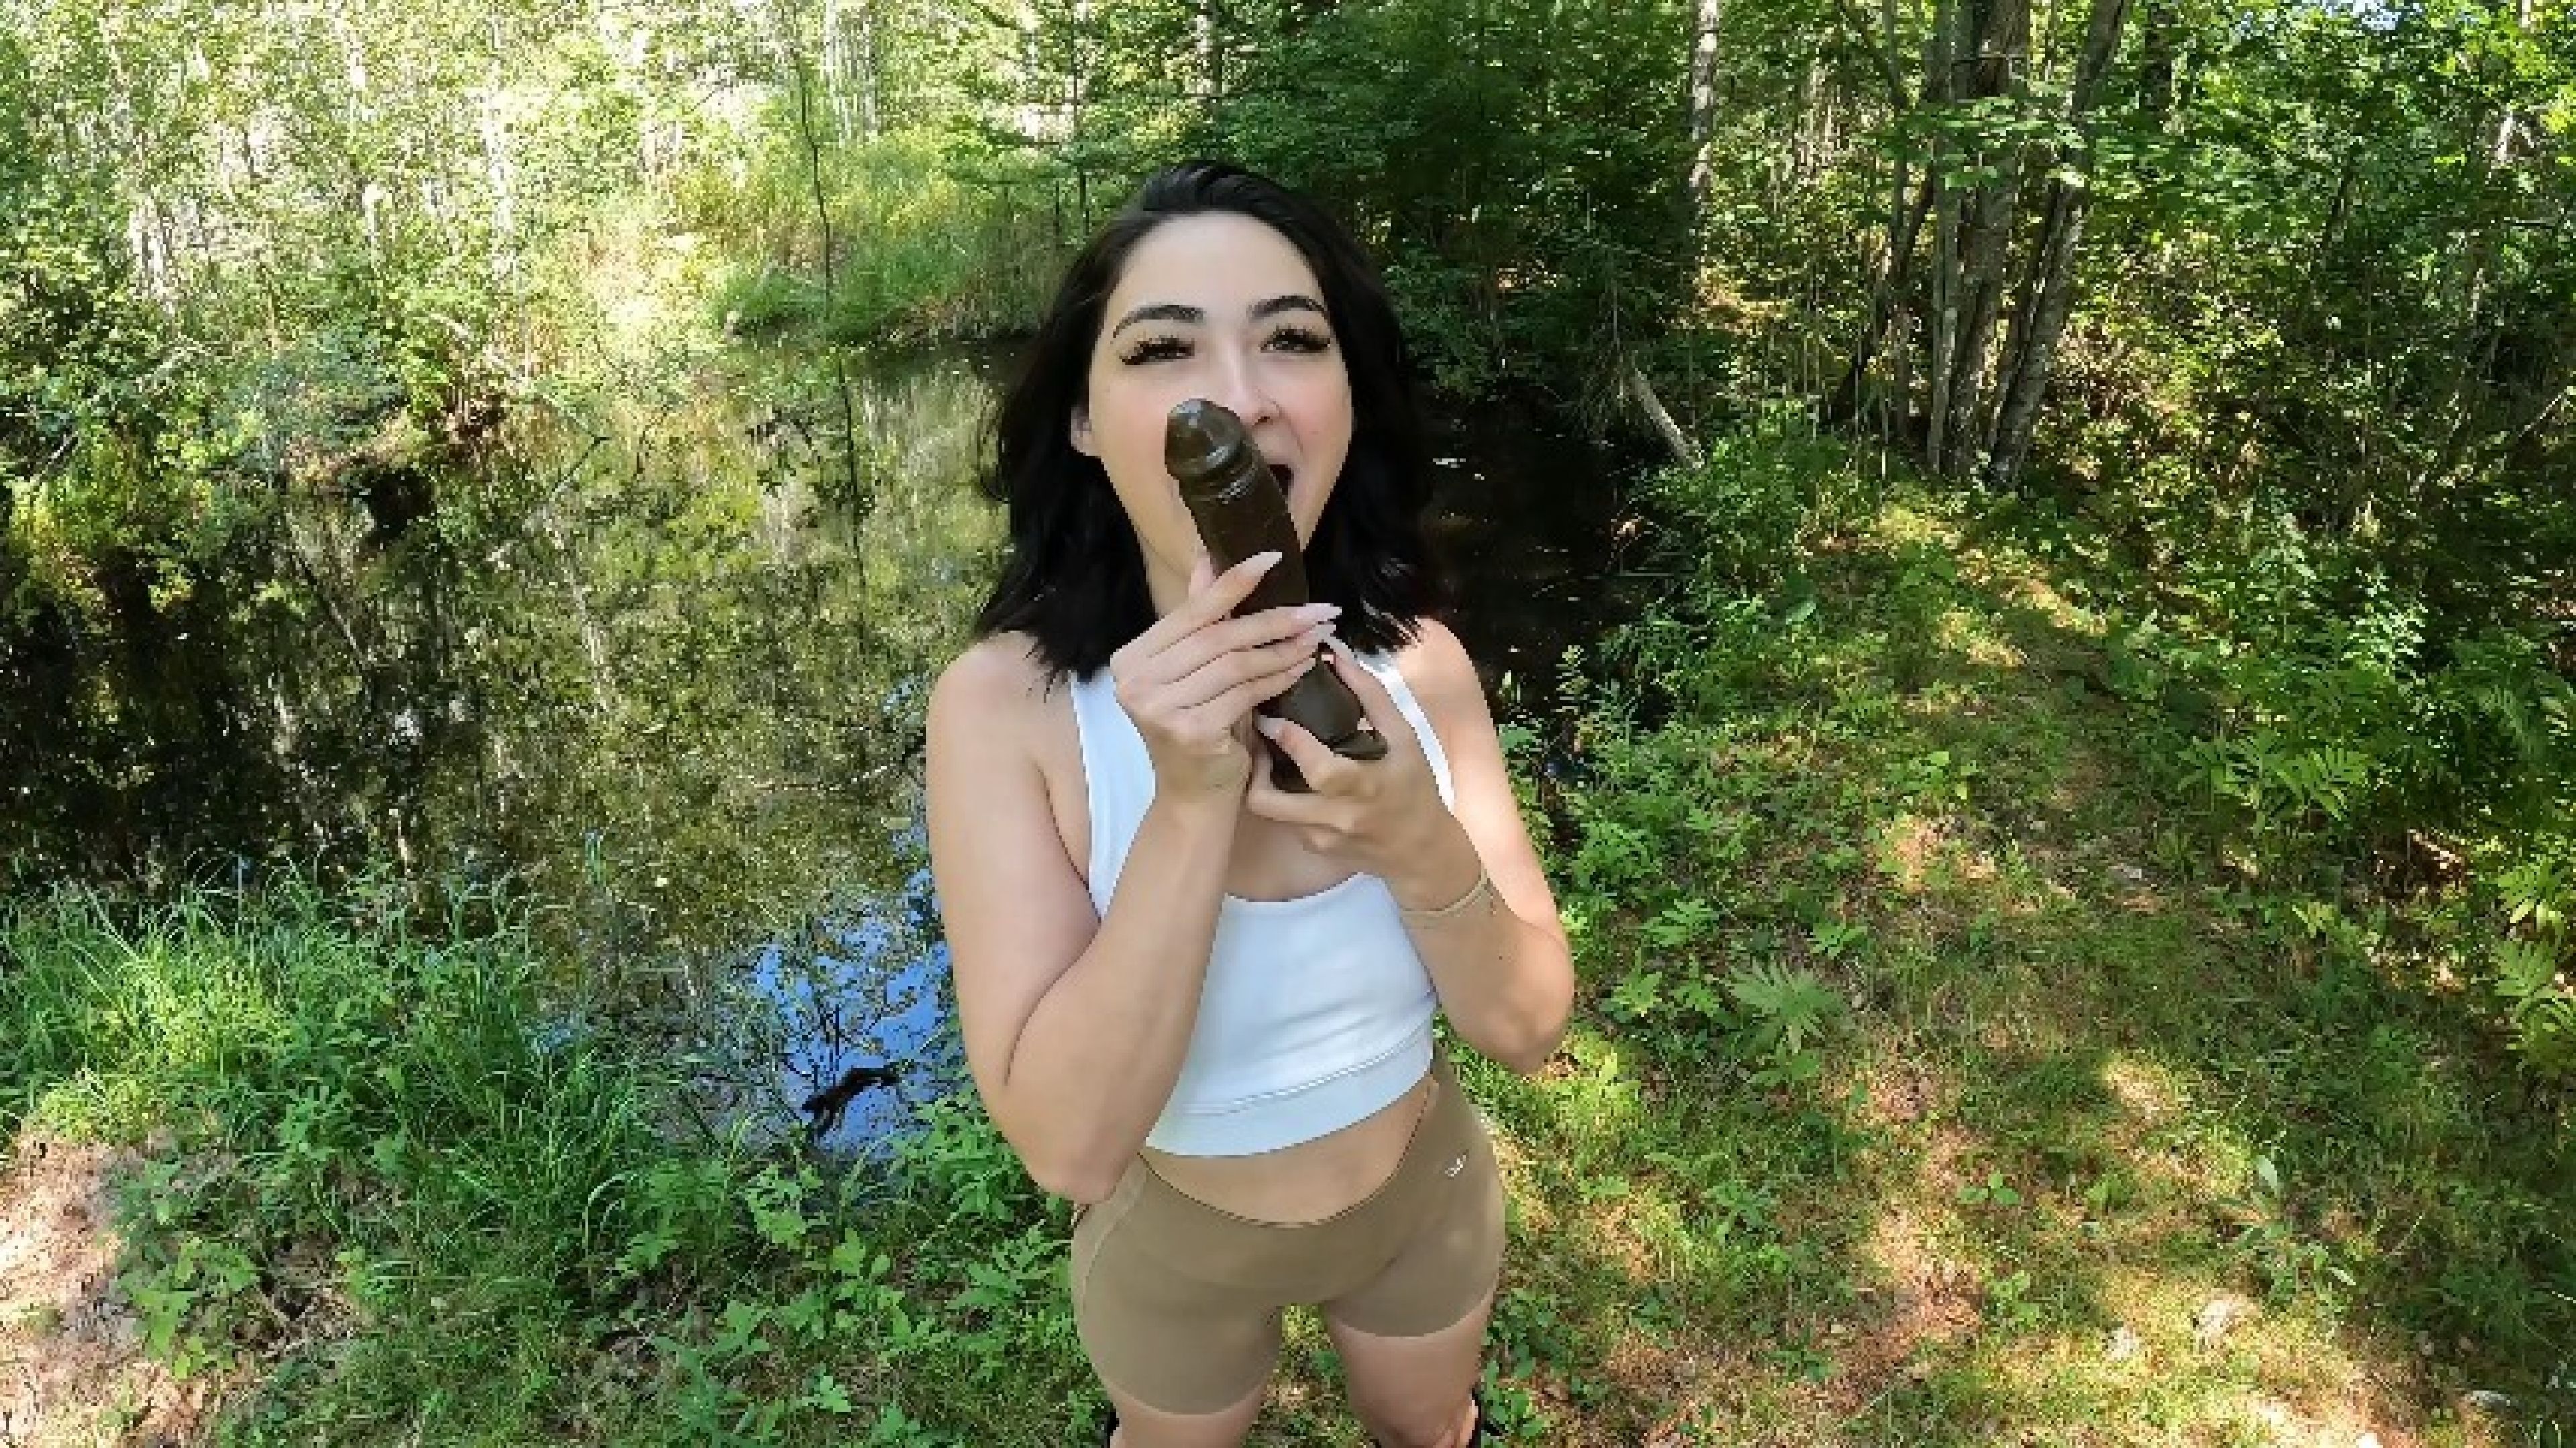 Huge Dildo Riding in The Woods